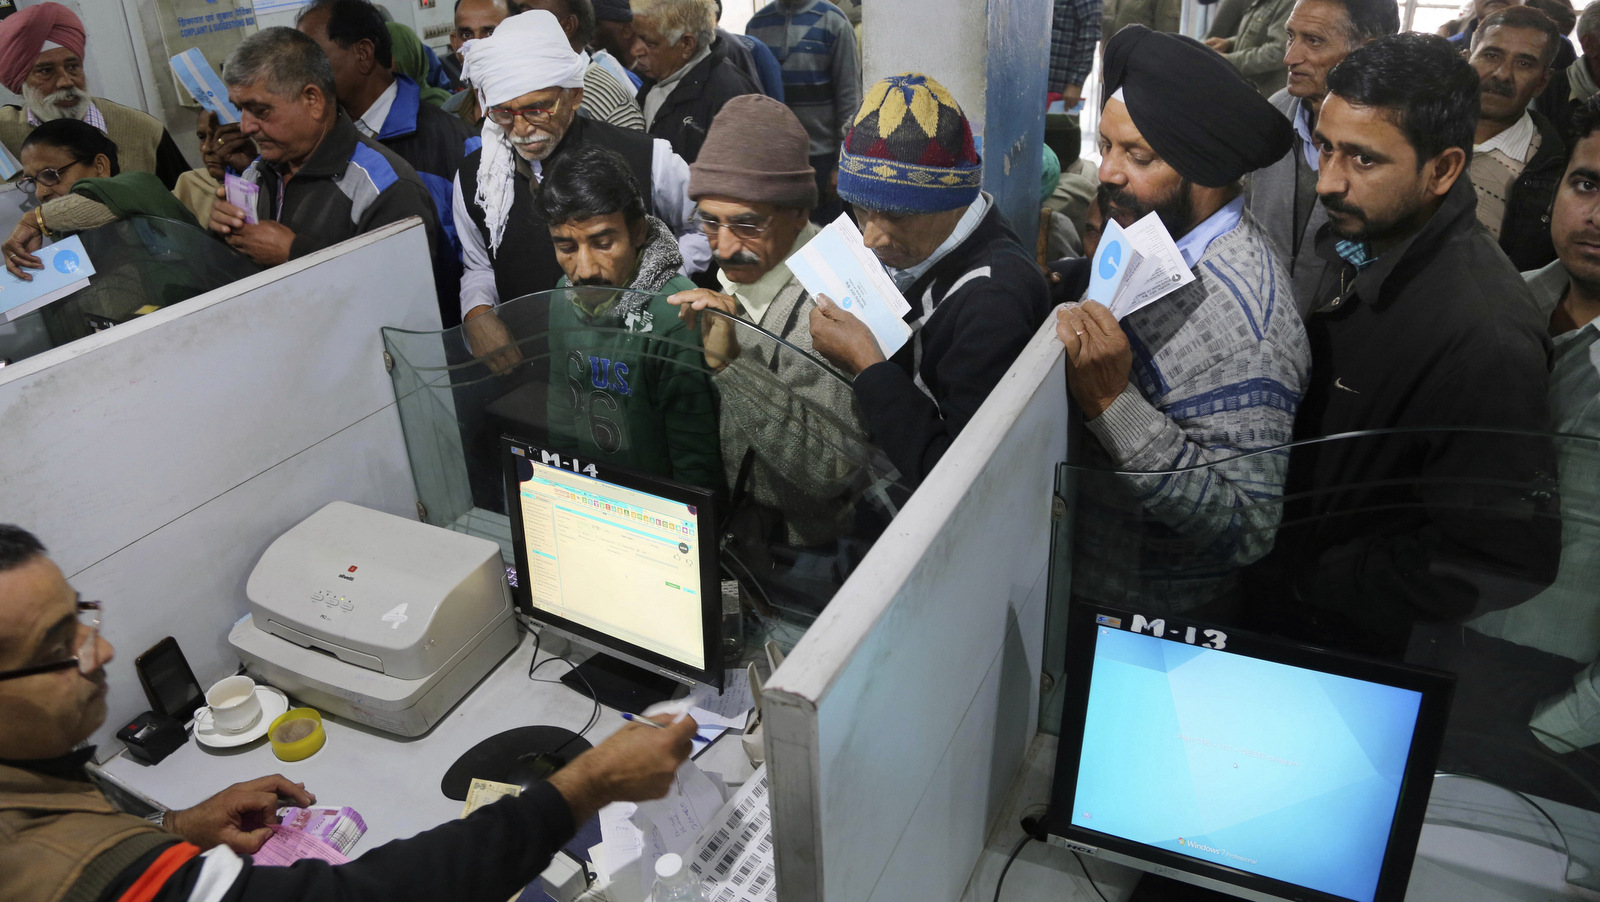 Indians stand in line to deposit discontinued notes in a bank in Jammu and Kashmir, India,, Dec. 30, 2016. India yanked most of its currency bills from circulation without warning on Nov. 8, delivering a jolt to the country's high-performing economy and leaving countless citizens scrambling for cash. (AP/Channi Anand)